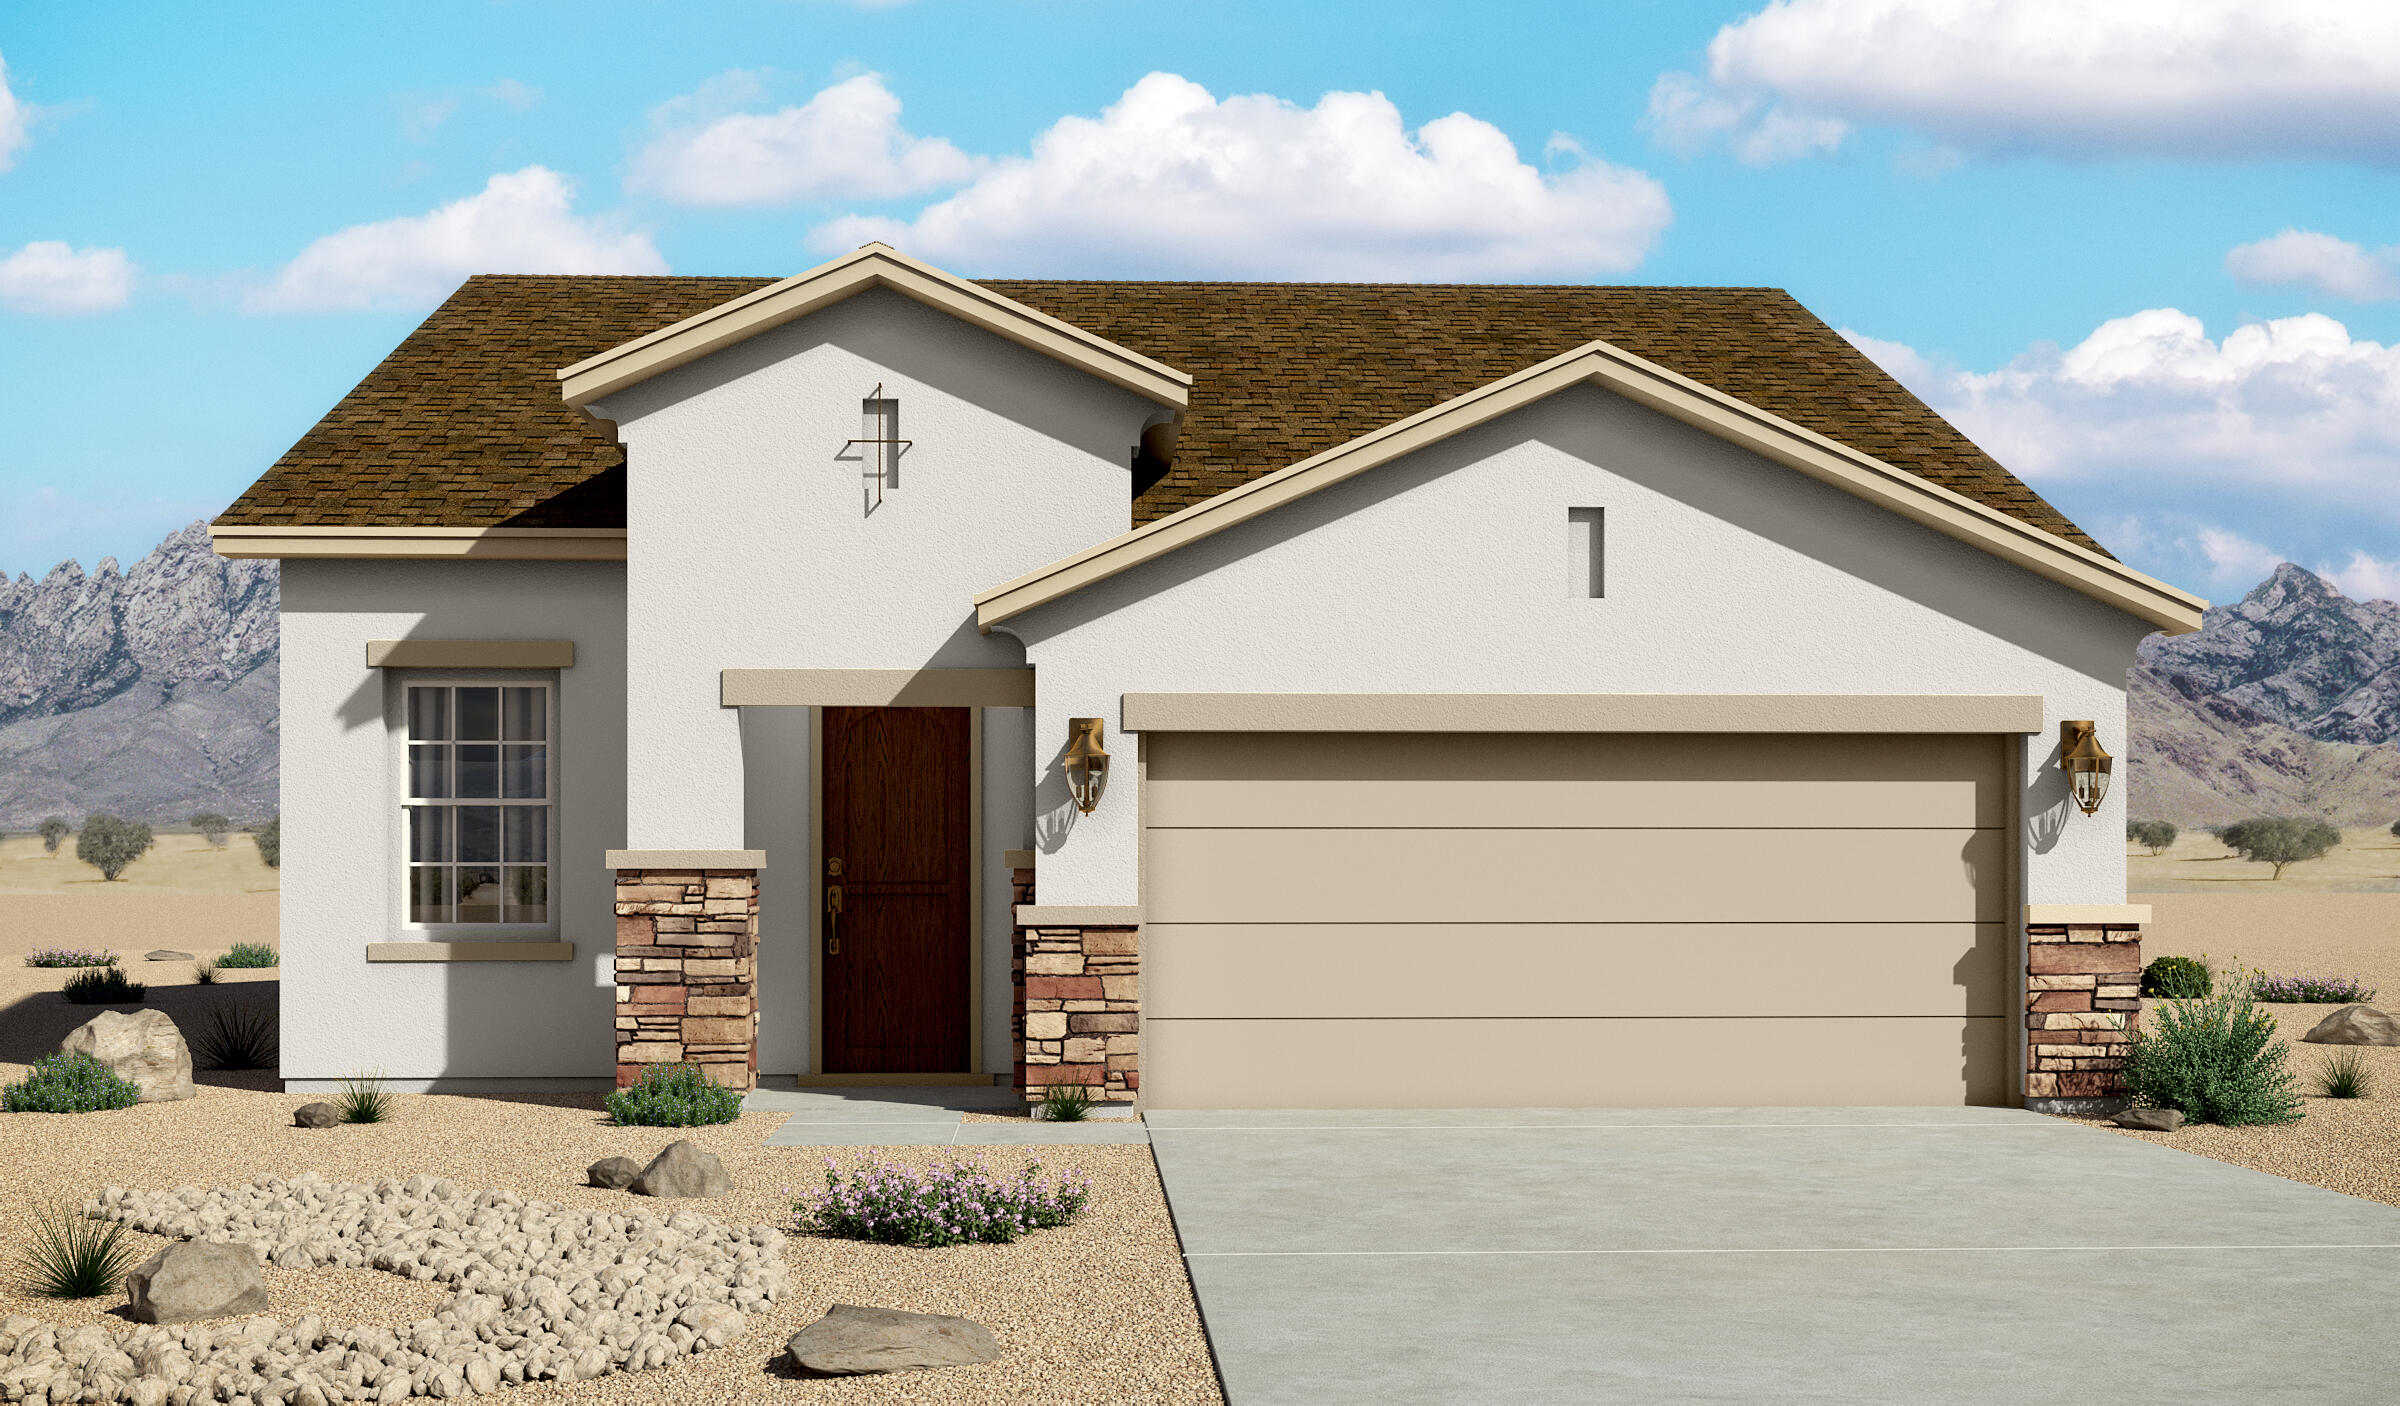 This home design features 3 bedrooms, 2 bathrooms, 2 car garage with a welcoming entry that opens to a bright, elegant dining room. The spacious kitchen functions as the heart of the home and the great room features a tray ceiling and welcomes an abundance of natural light. Home is still under construction.